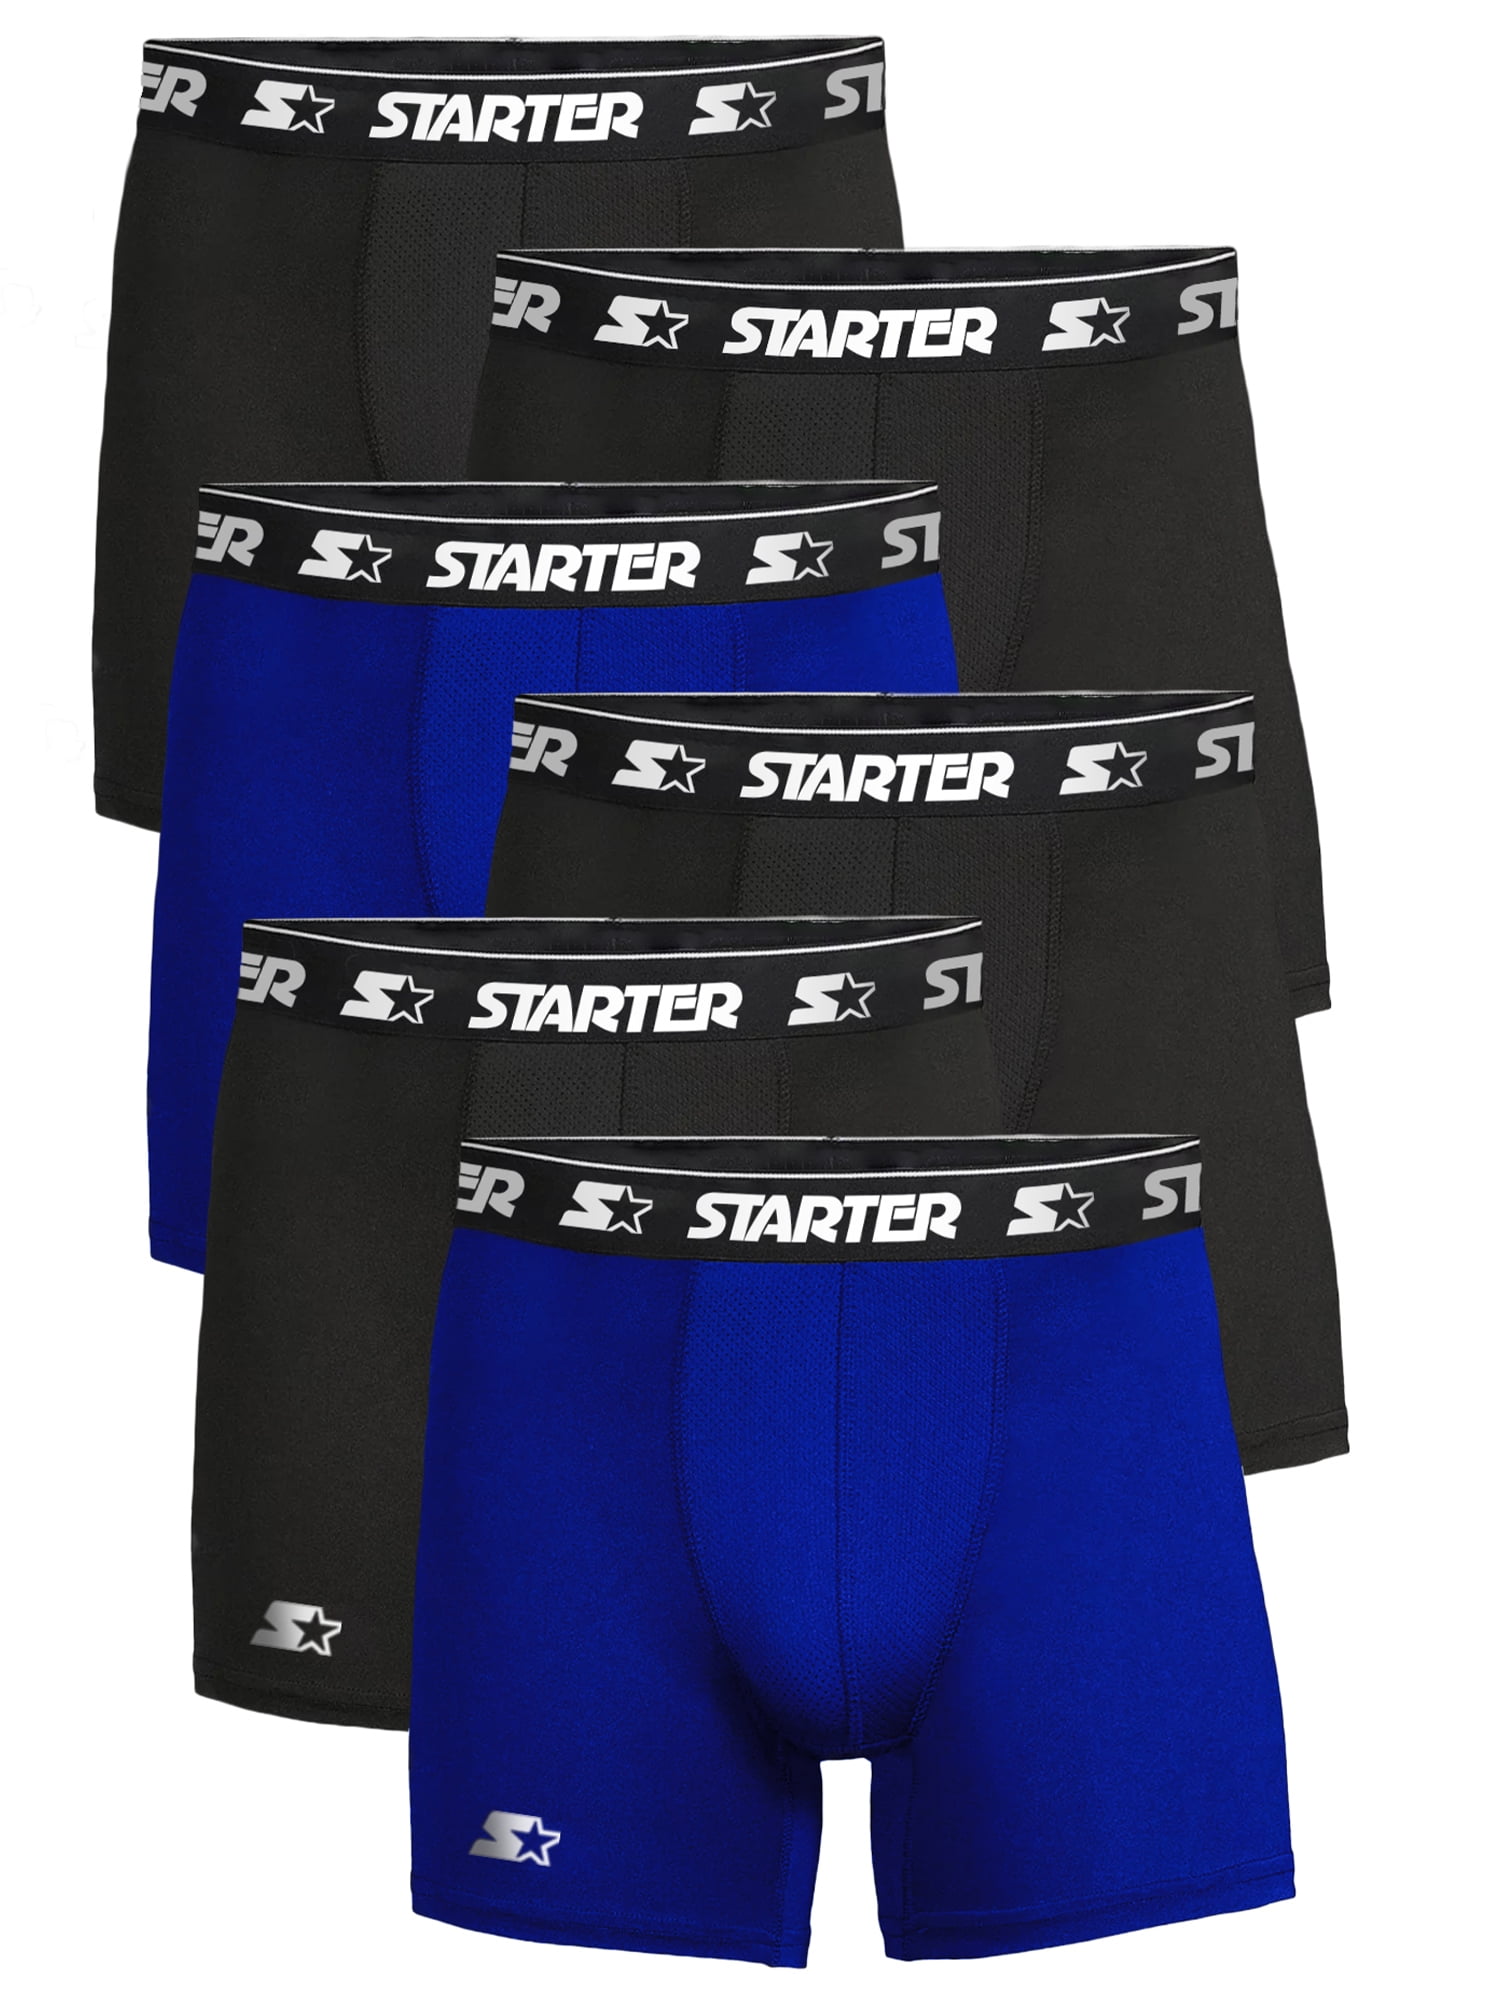 Starter Performance Boxer Briefs for Men Pack of 6 - Breathable Comfortable  Mens Boxer Briefs Moisture Wicking Mens Underwear (Small, Black) at   Men's Clothing store